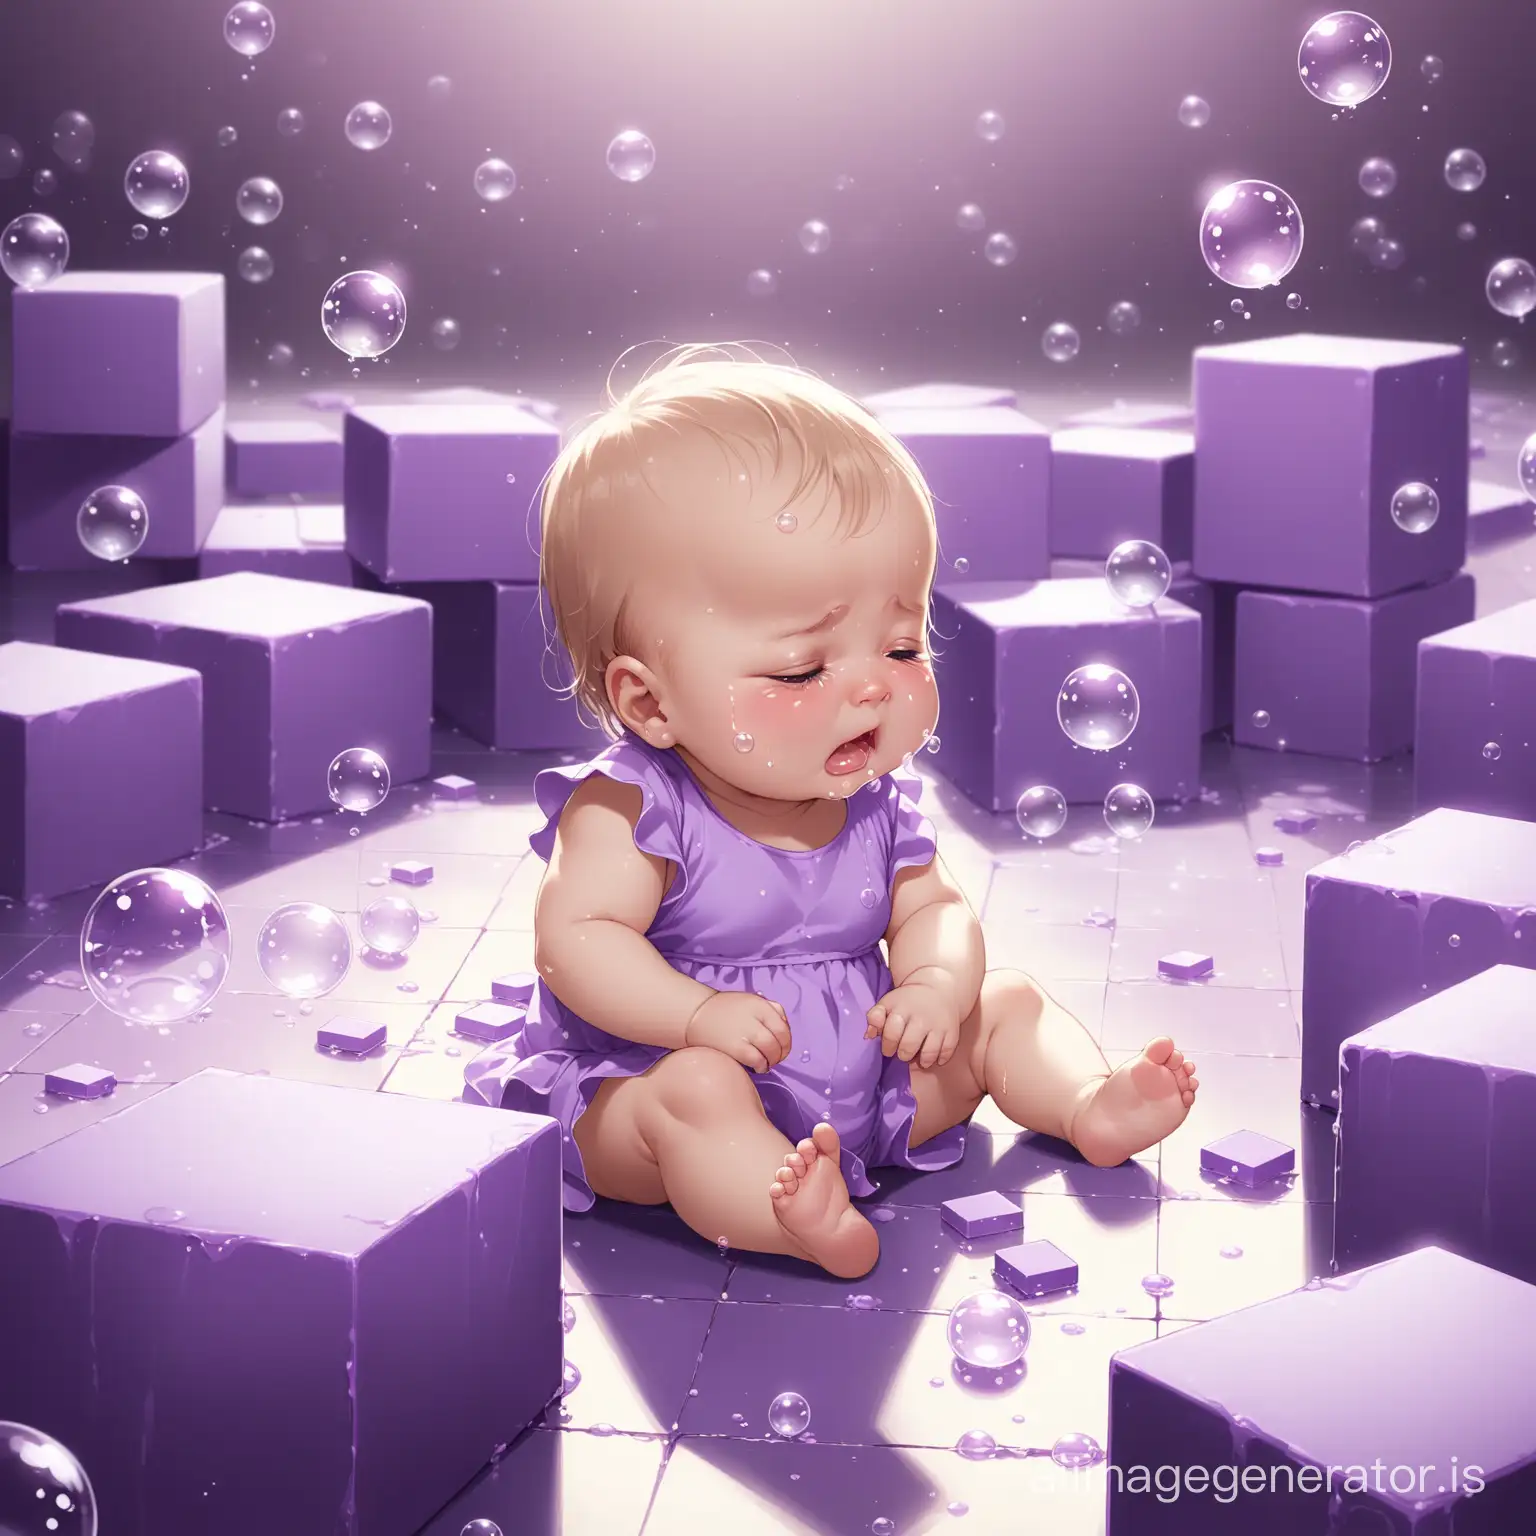 Infant-in-Playroom-with-Bubbles-and-Spilled-Purple-Blocks